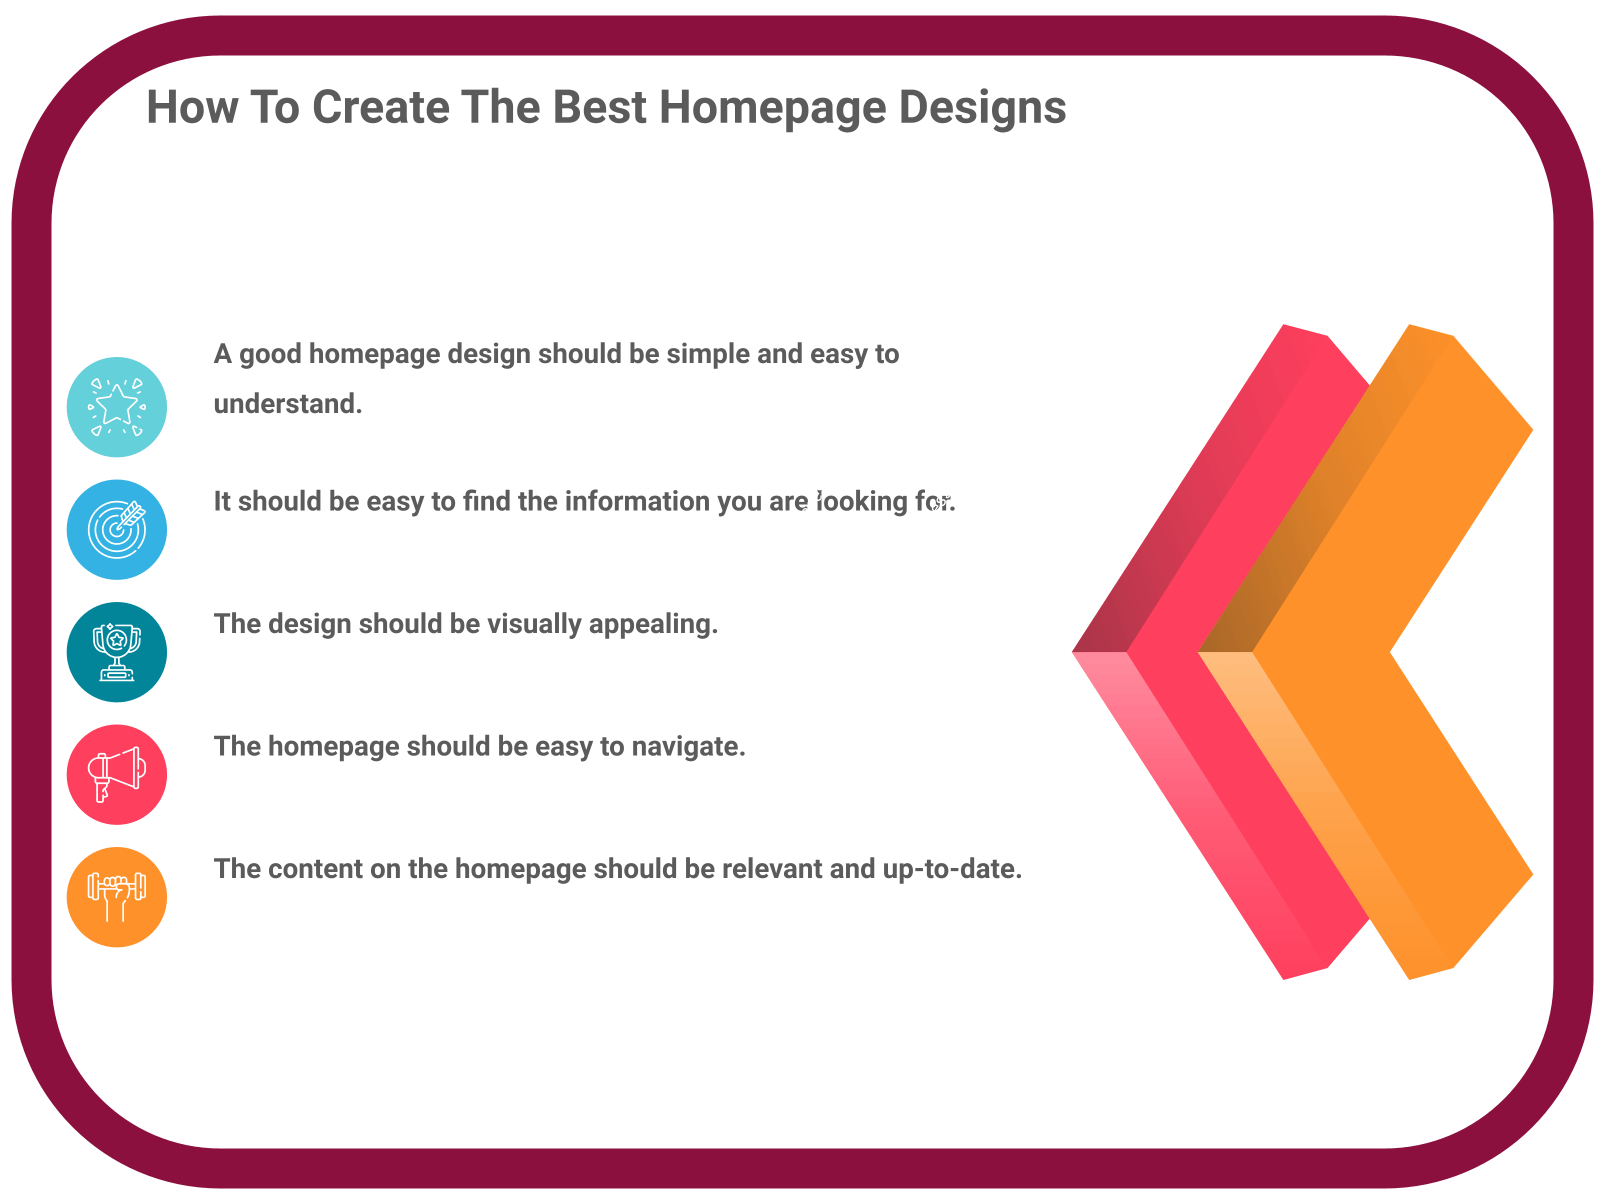 INFOGRAPHIC: How To Create The Best Homepage Designs - Poll the People